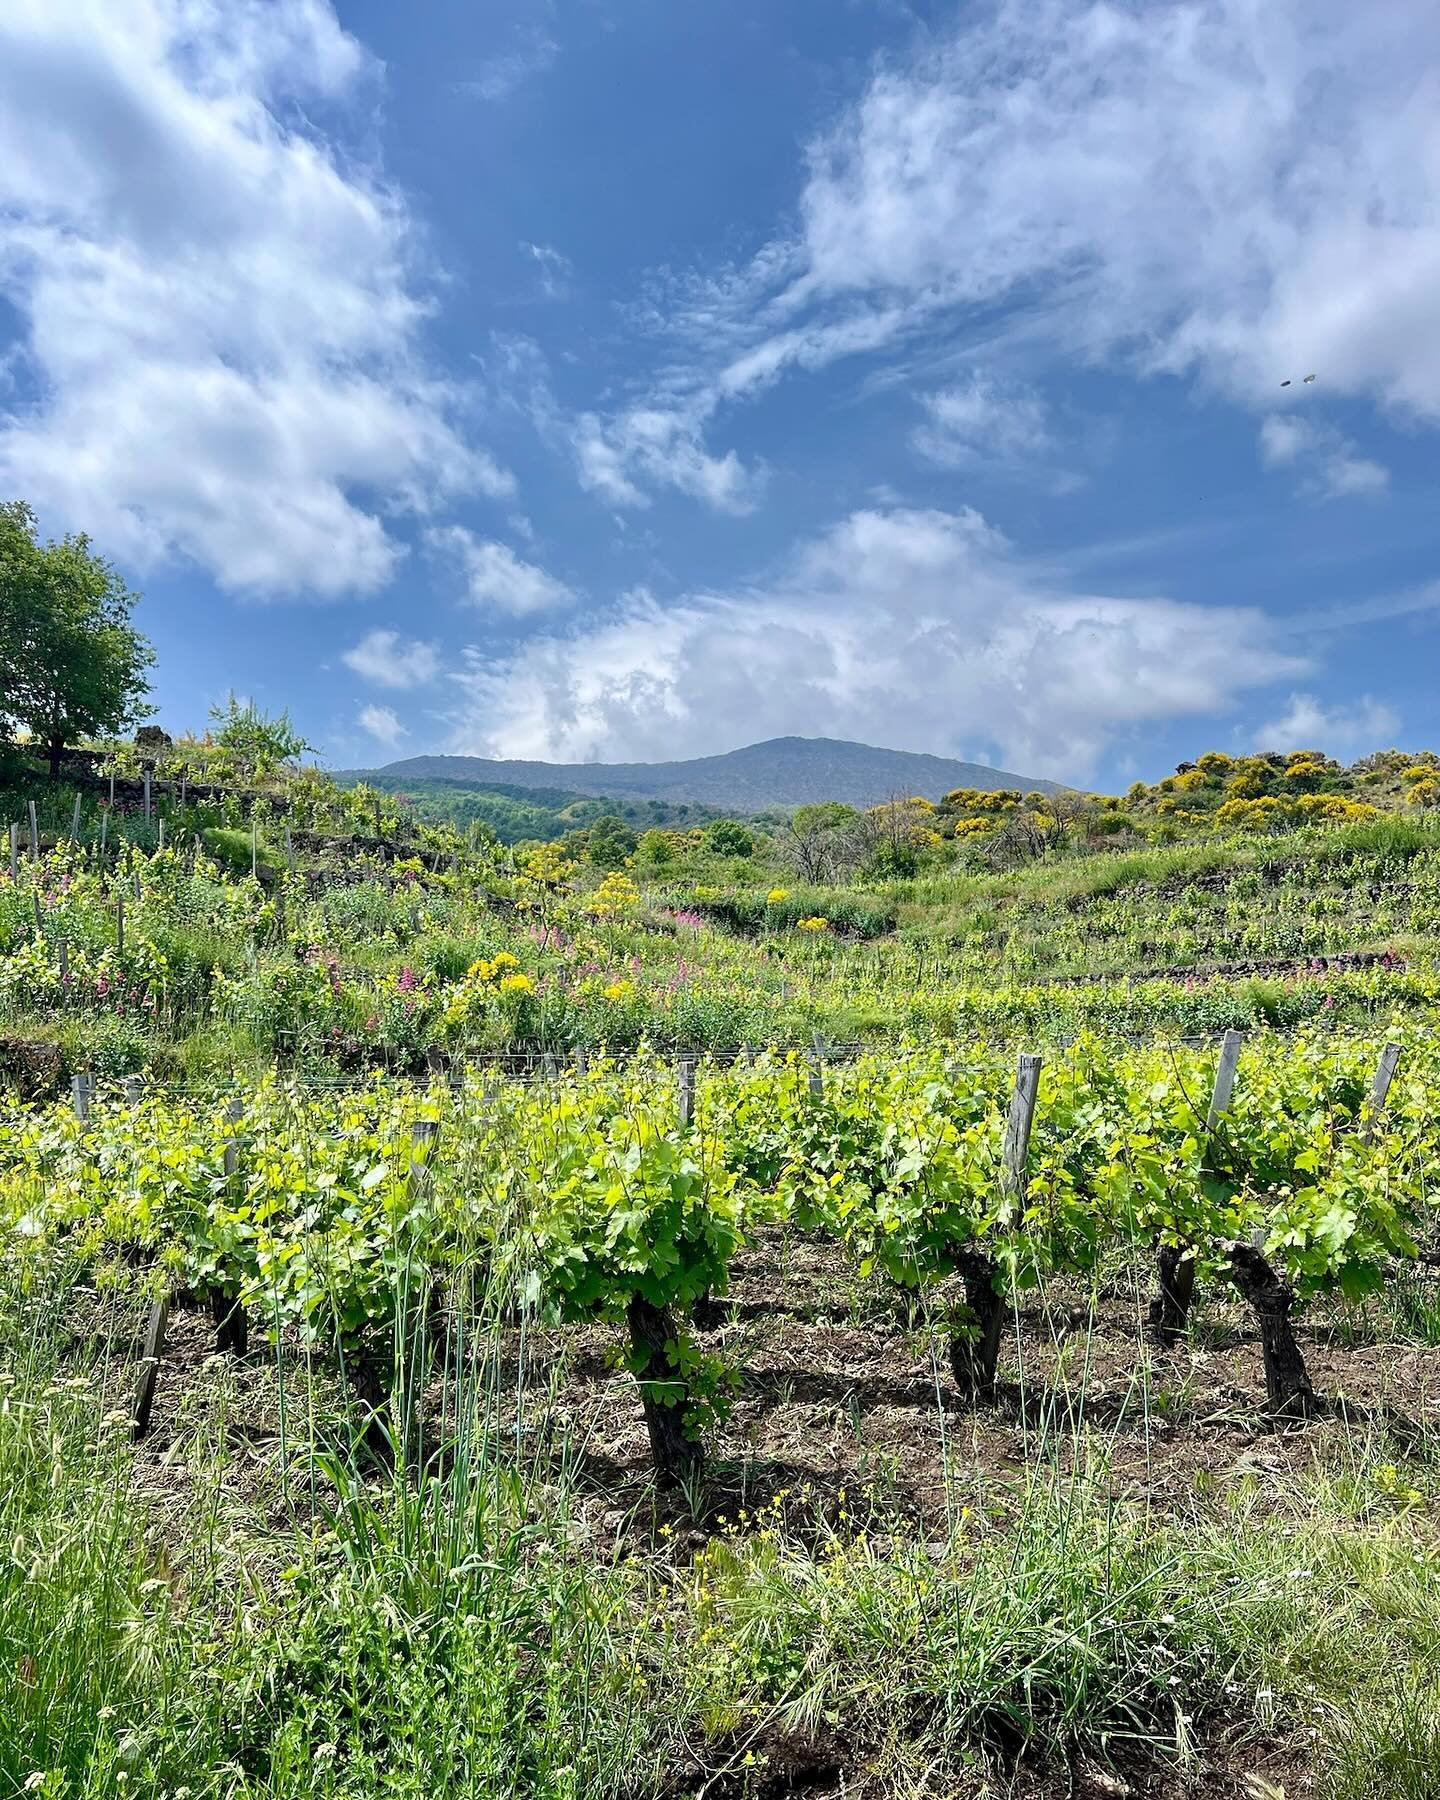 A snow covered Mt Etna greeted us at the Catania airport. We spent the next hour and a half moving quickly up the side of the western flank to get to the vineyards on the north slope where the magic of Nerello Mascalese unfolds. These are high mounta